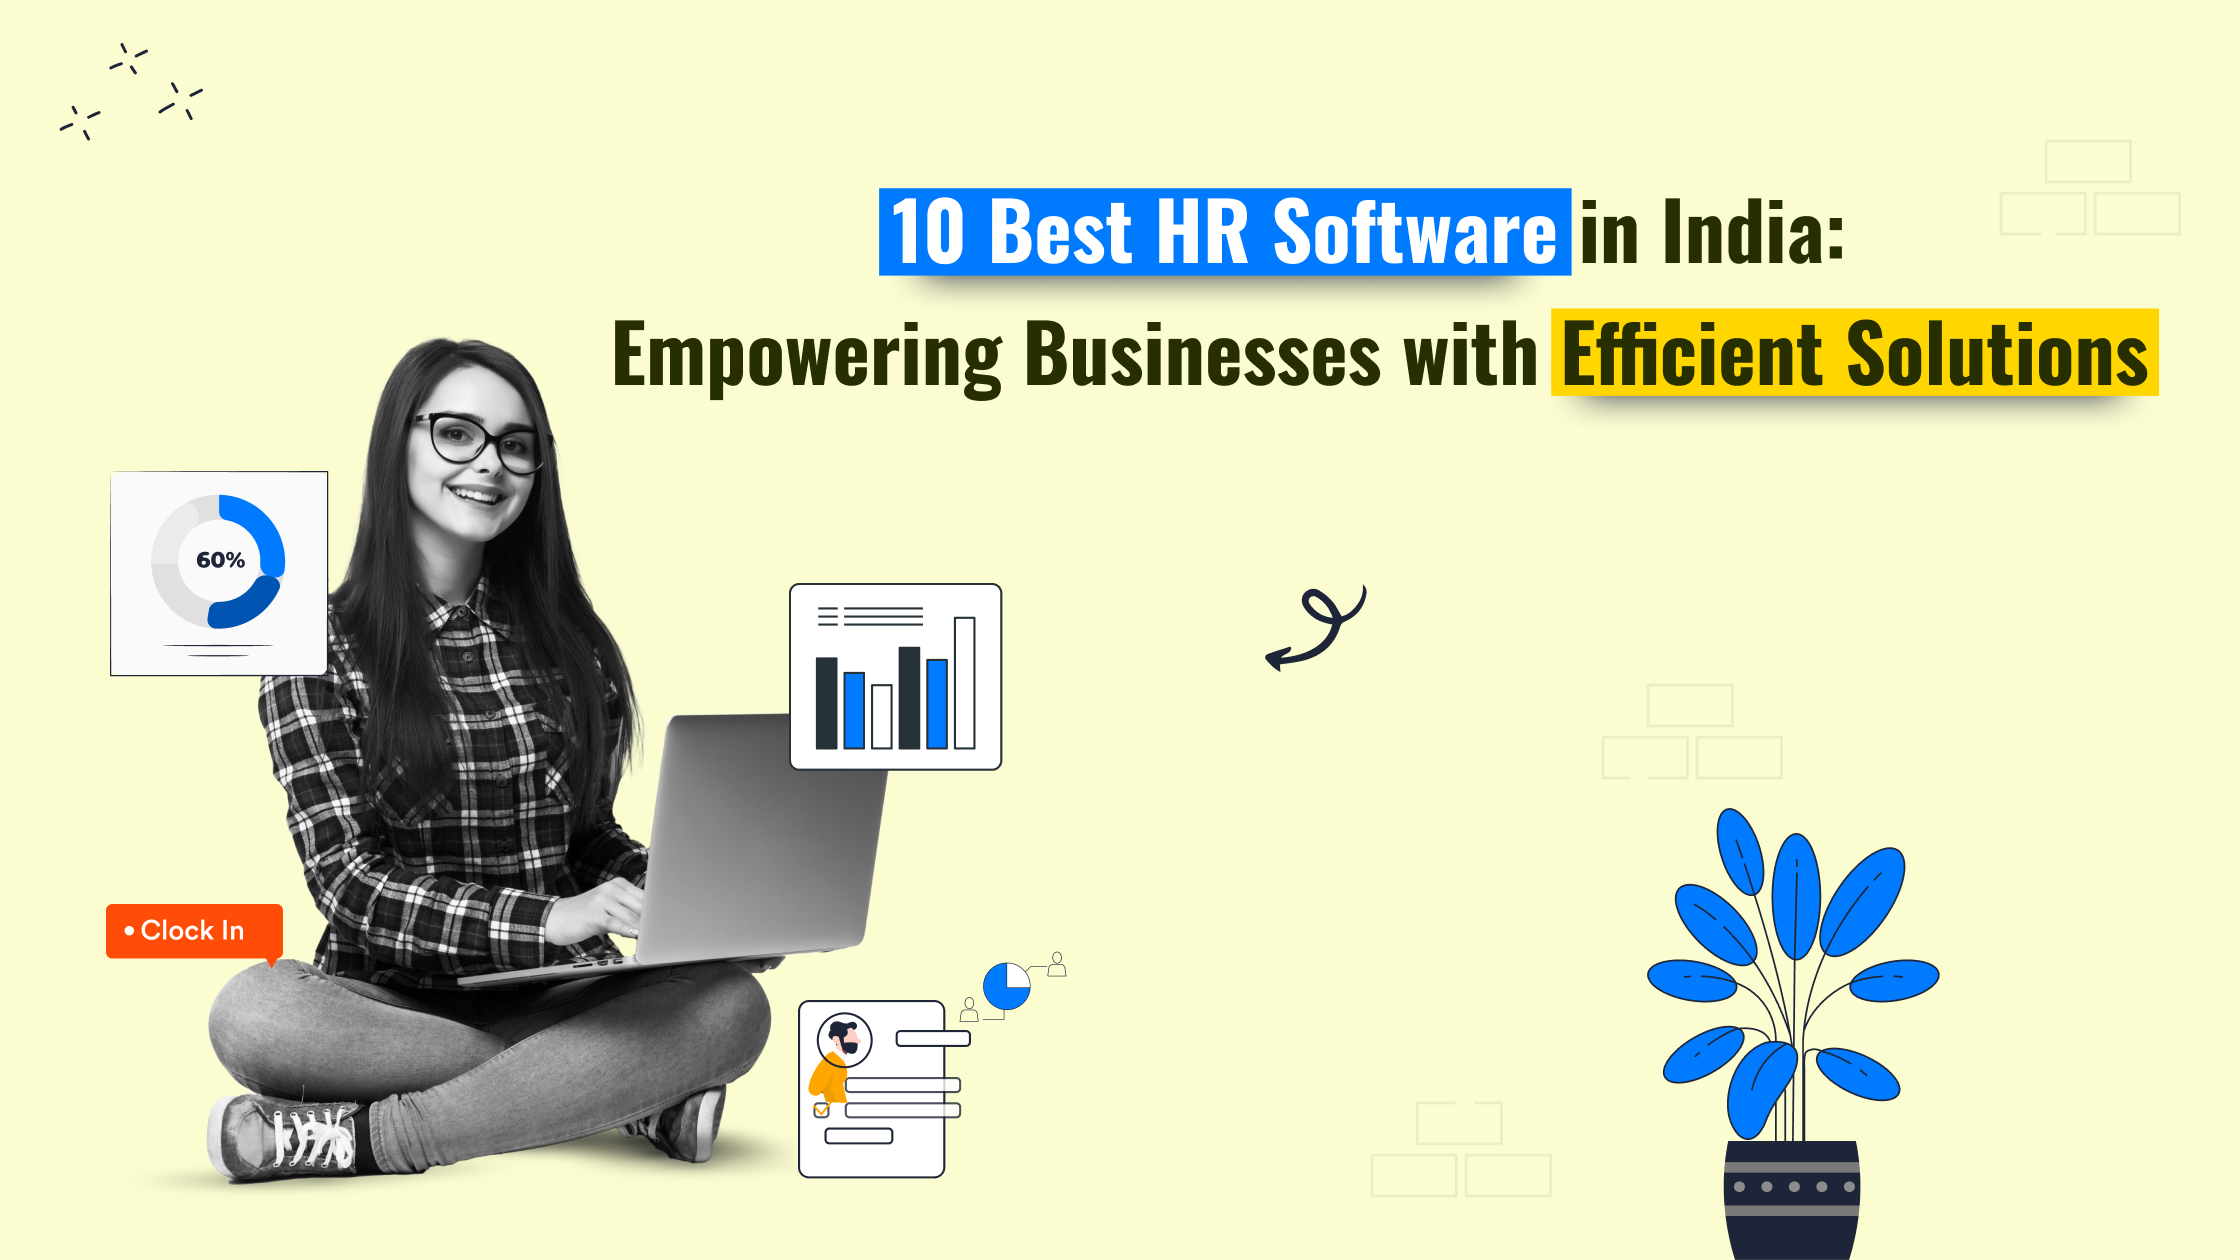 HR Software in India